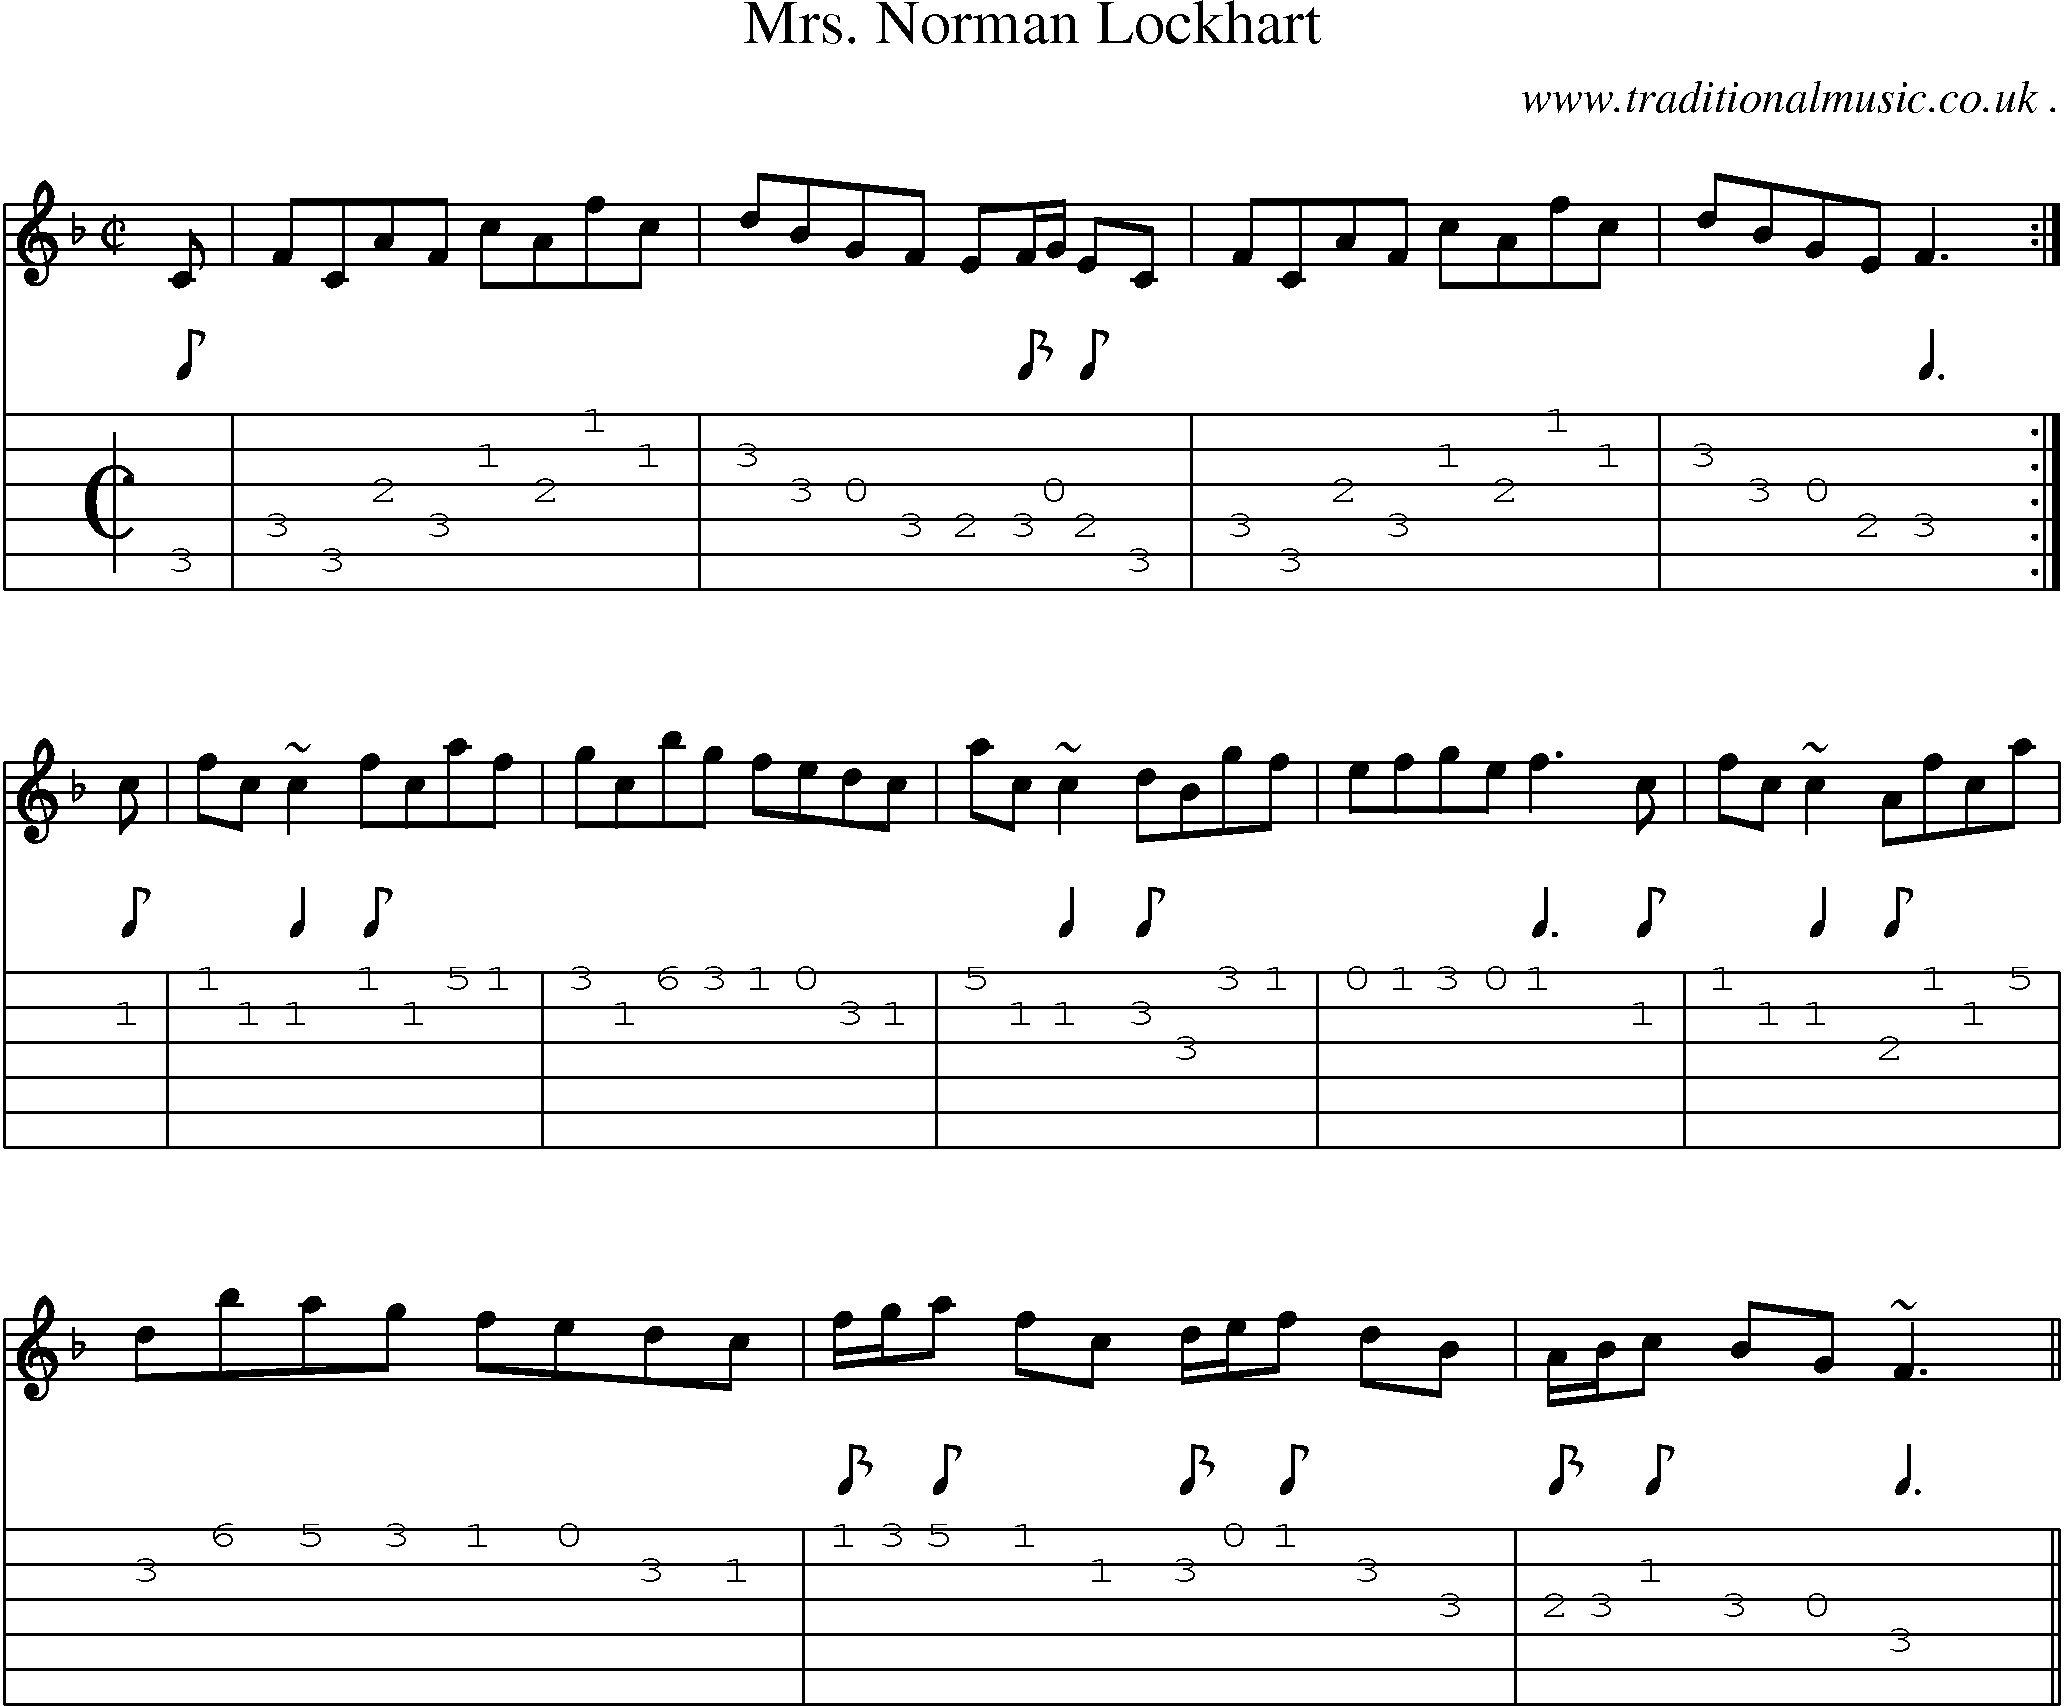 Sheet-music  score, Chords and Guitar Tabs for Mrs Norman Lockhart